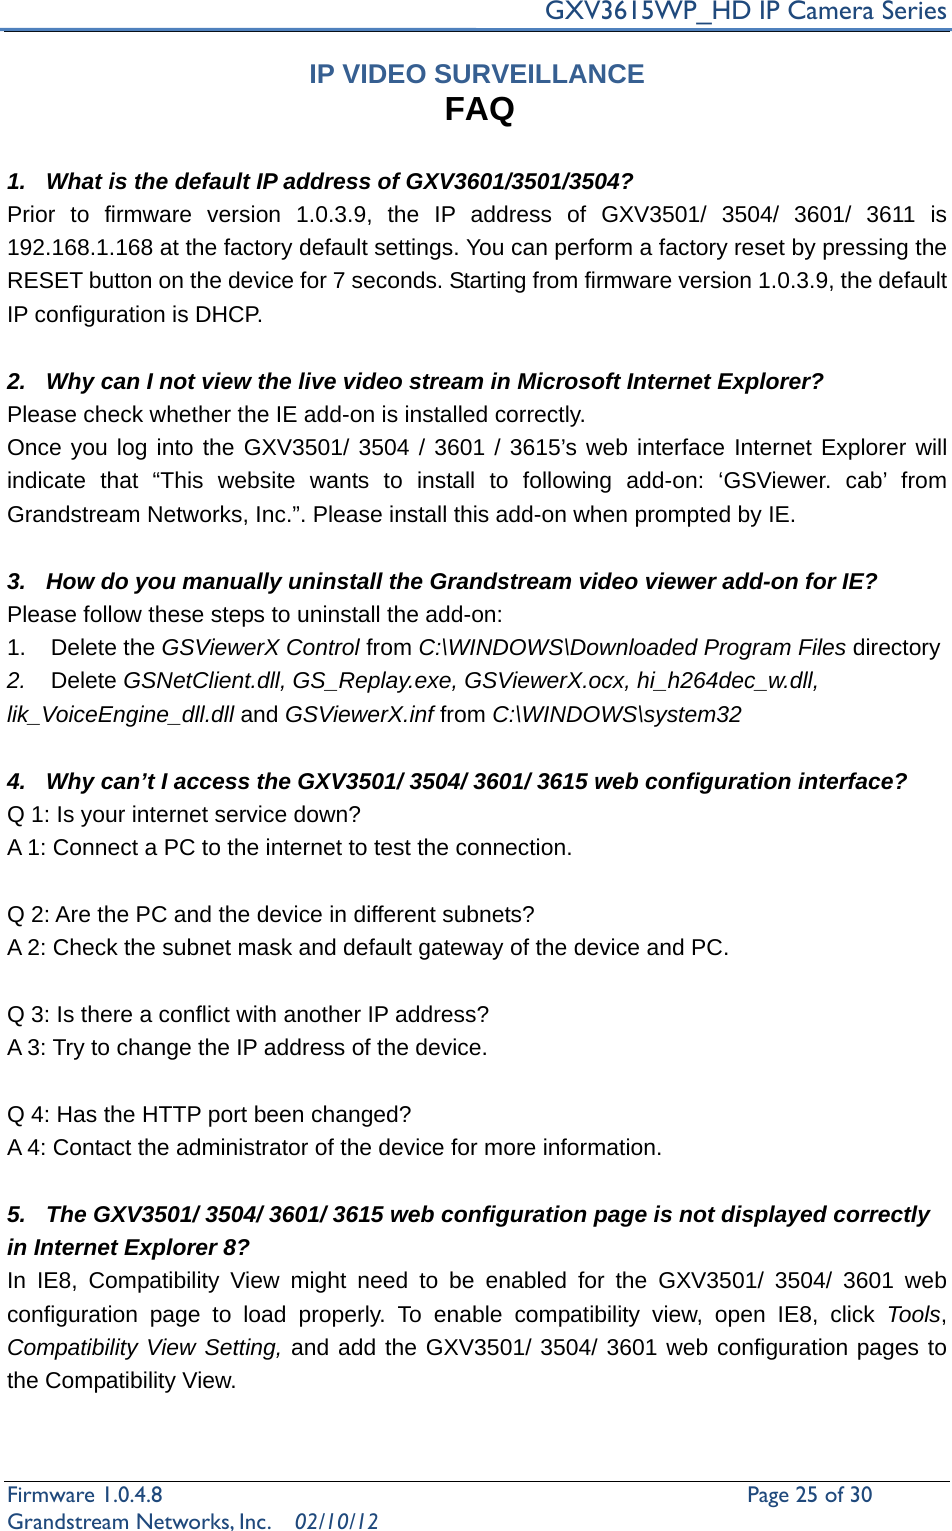     GXV3615WP_HD IP Camera Series Firmware 1.0.4.8                                                   Page 25 of 30     Grandstream Networks, Inc.  02/10/12  IP VIDEO SURVEILLANCE FAQ  1.  What is the default IP address of GXV3601/3501/3504? Prior to firmware version 1.0.3.9, the IP address of GXV3501/ 3504/ 3601/ 3611 is 192.168.1.168 at the factory default settings. You can perform a factory reset by pressing the RESET button on the device for 7 seconds. Starting from firmware version 1.0.3.9, the default IP configuration is DHCP.  2.  Why can I not view the live video stream in Microsoft Internet Explorer? Please check whether the IE add-on is installed correctly.   Once you log into the GXV3501/ 3504 / 3601 / 3615’s web interface Internet Explorer will indicate that “This website wants to install to following add-on: ‘GSViewer. cab’ from Grandstream Networks, Inc.”. Please install this add-on when prompted by IE.  3.  How do you manually uninstall the Grandstream video viewer add-on for IE?   Please follow these steps to uninstall the add-on:   1. Delete the GSViewerX Control from C:\WINDOWS\Downloaded Program Files directory   2.  Delete GSNetClient.dll, GS_Replay.exe, GSViewerX.ocx, hi_h264dec_w.dll, lik_VoiceEngine_dll.dll and GSViewerX.inf from C:\WINDOWS\system32  4.  Why can’t I access the GXV3501/ 3504/ 3601/ 3615 web configuration interface?   Q 1: Is your internet service down?   A 1: Connect a PC to the internet to test the connection.  Q 2: Are the PC and the device in different subnets?   A 2: Check the subnet mask and default gateway of the device and PC.  Q 3: Is there a conflict with another IP address?   A 3: Try to change the IP address of the device.    Q 4: Has the HTTP port been changed?   A 4: Contact the administrator of the device for more information.  5.  The GXV3501/ 3504/ 3601/ 3615 web configuration page is not displayed correctly in Internet Explorer 8? In IE8, Compatibility View might need to be enabled for the GXV3501/ 3504/ 3601 web configuration page to load properly. To enable compatibility view, open IE8, click Tools, Compatibility View Setting, and add the GXV3501/ 3504/ 3601 web configuration pages to the Compatibility View.    